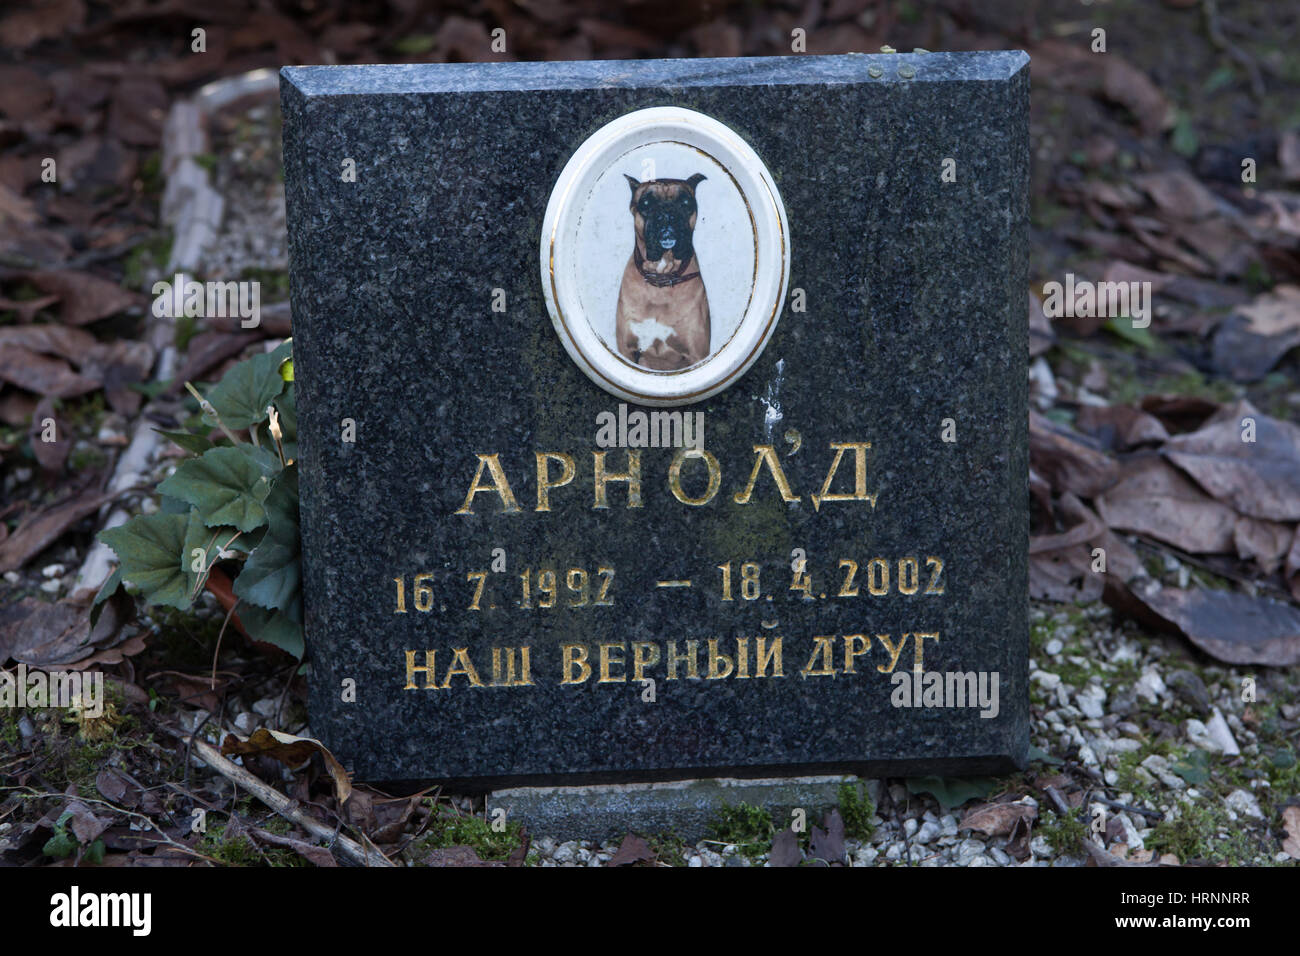 Abandoned pet cemetery in Prague, Czech Republic. The only pet cemetery in Prague located in the removed district of Bohnice is abandoned for more then ten years. The last burial was hold here before January 2007 when new burials were banned by local authorities due the unclear property rights for the land. Inscription in Russian on the boxer dog's grave means: Arnold (1992-2002). Our true friend. Stock Photo